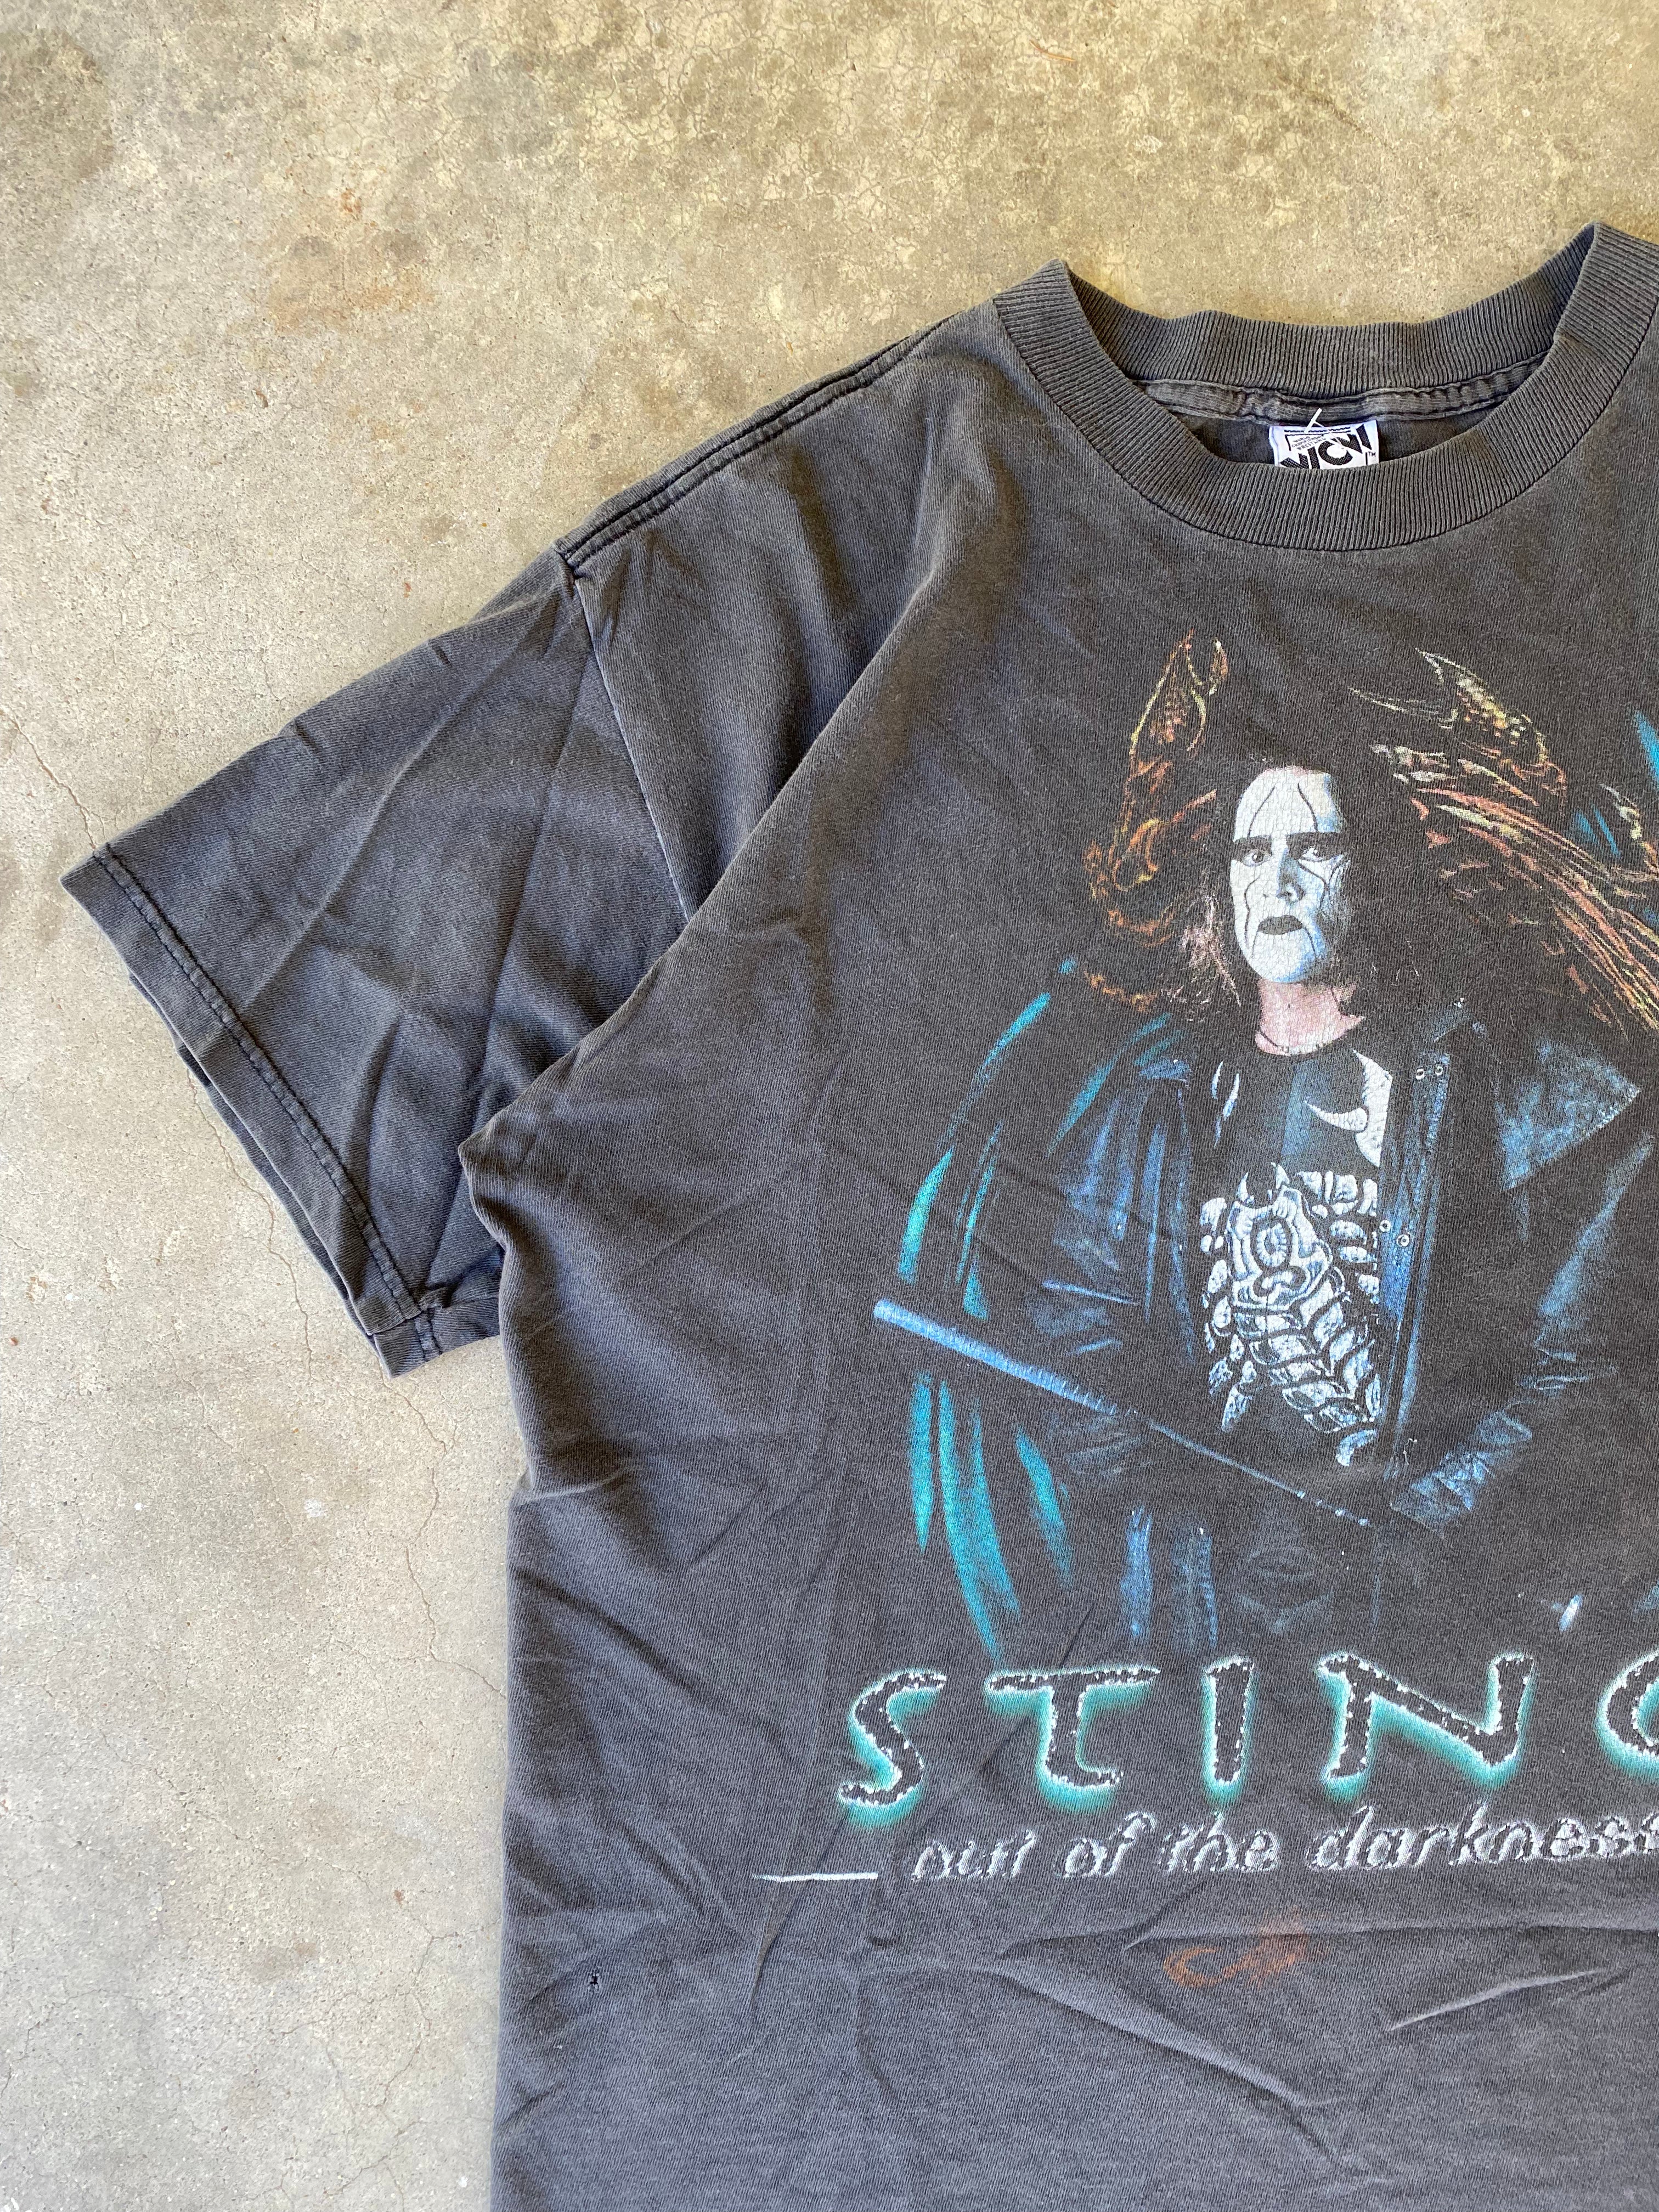 1999 Sting “Out of the Darkness” Faded T-Shirt